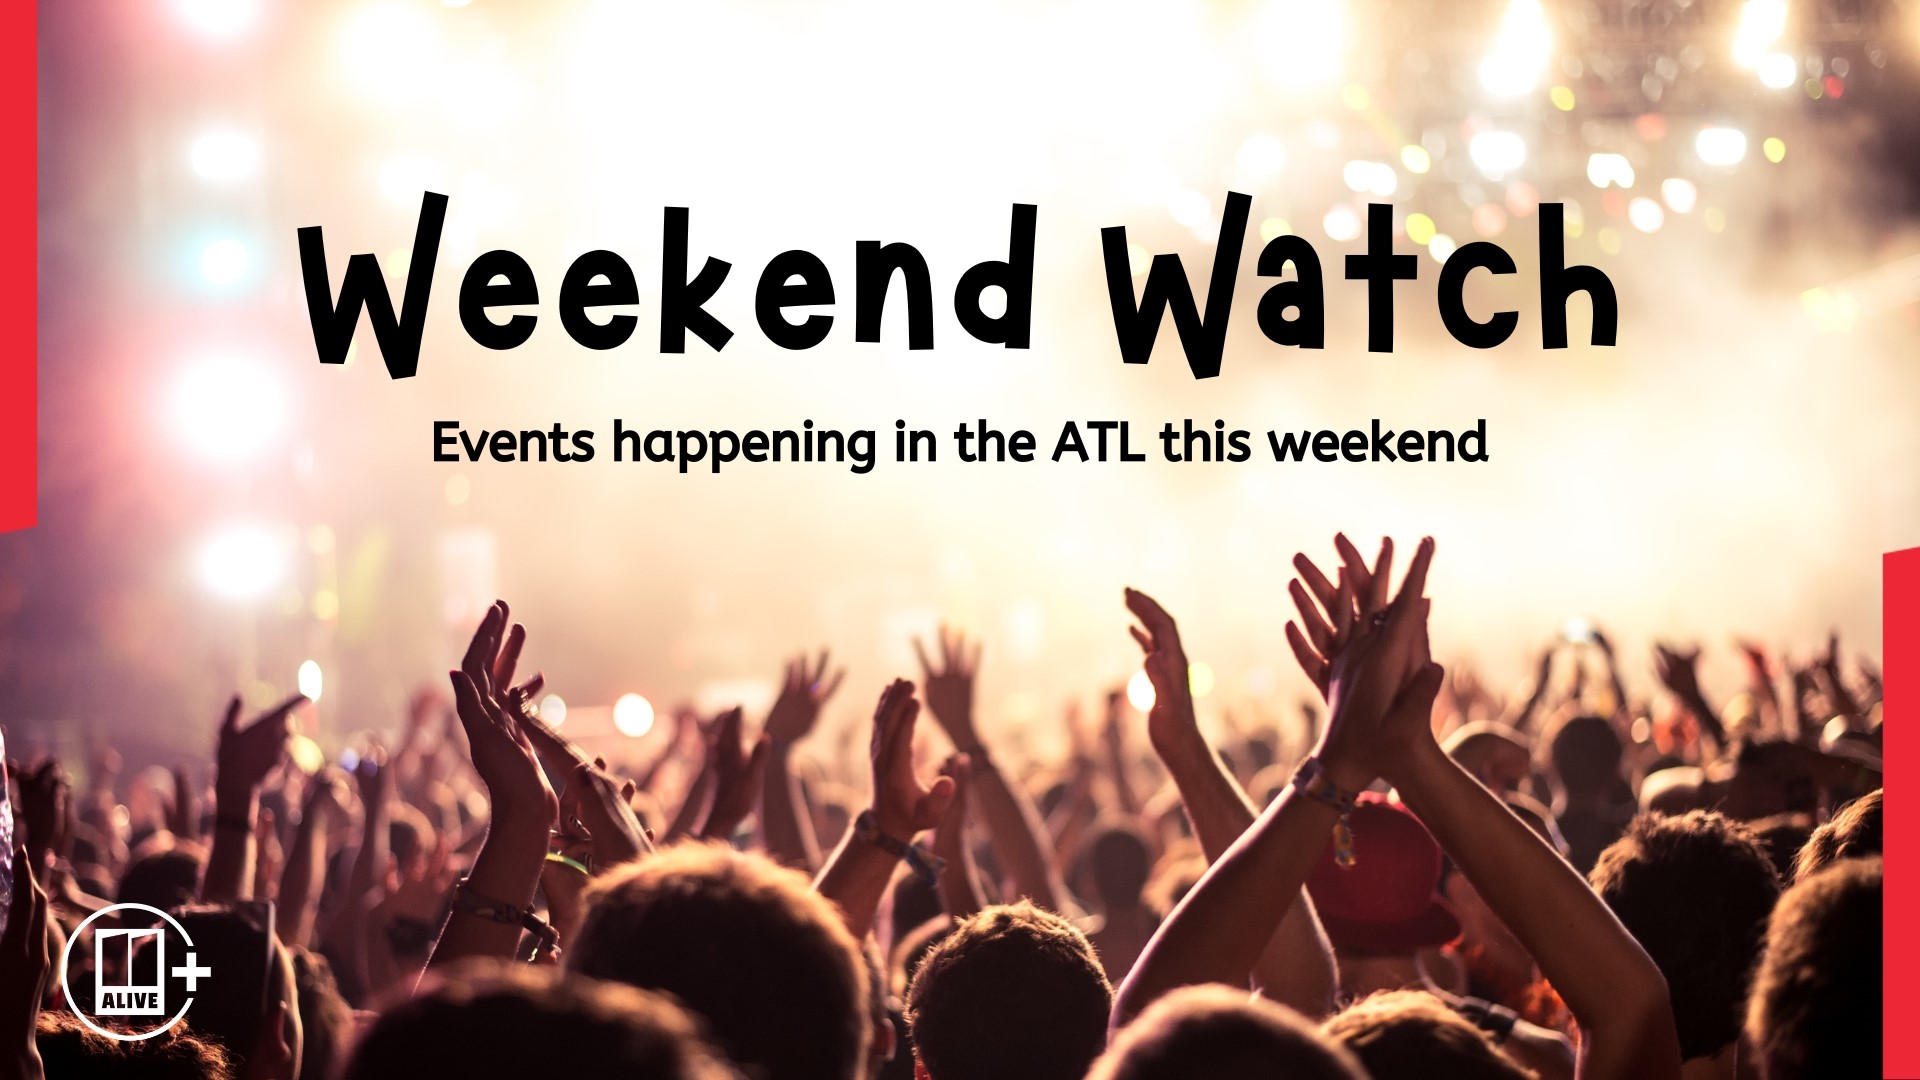 Here are some upcoming events around metro Atlanta this weekend: June 9, 10 and 11.